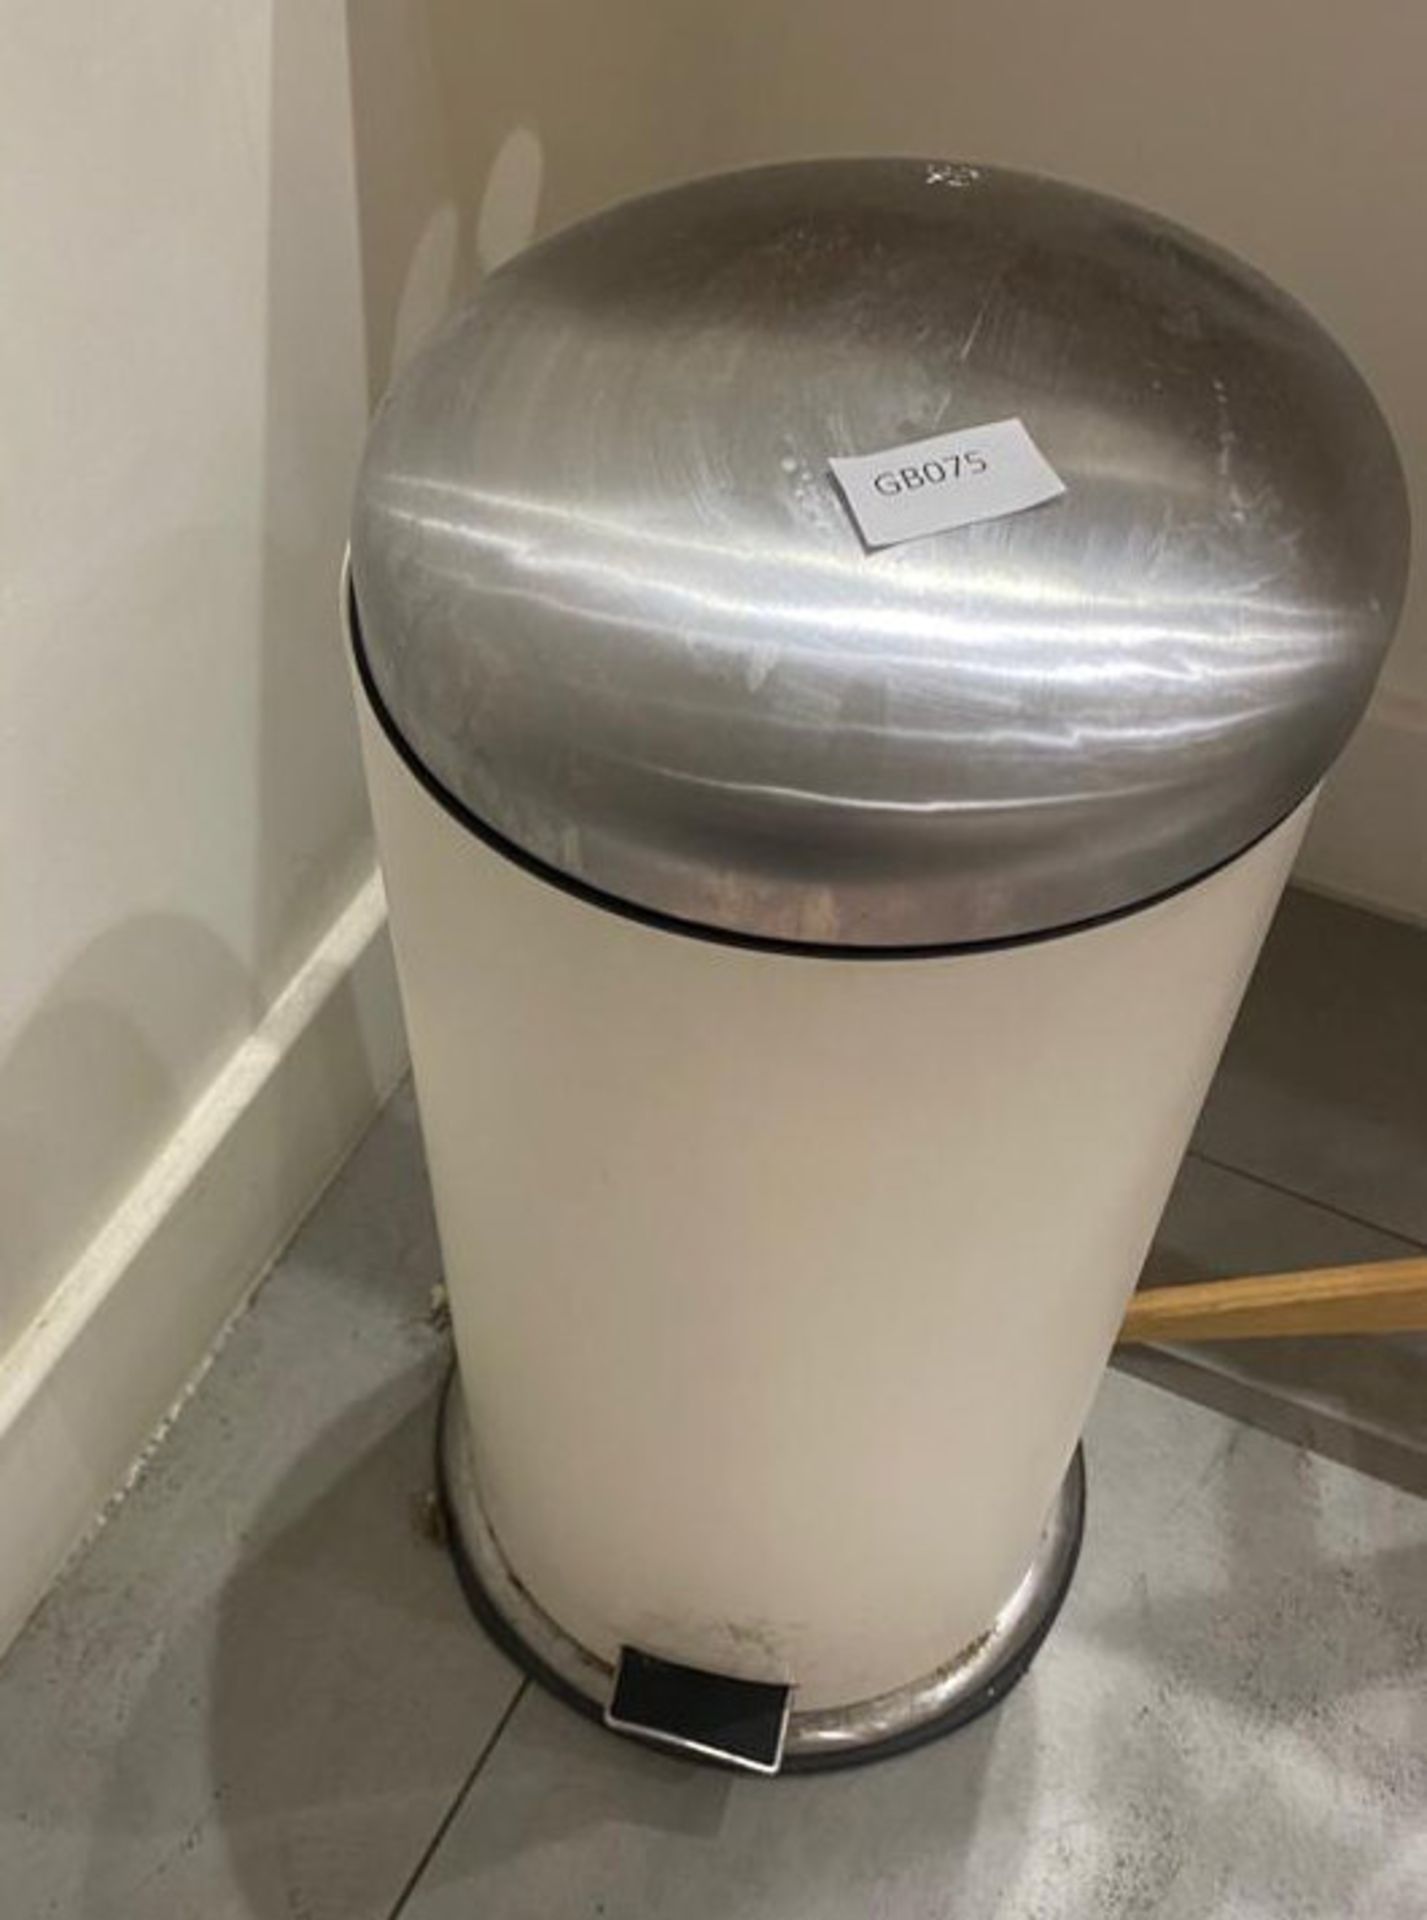 1 x Round Metal Pedal Bin In Cream - Size: 350mm x 700mm - CL776 - Ref: GB075 - Location: London - Image 2 of 2